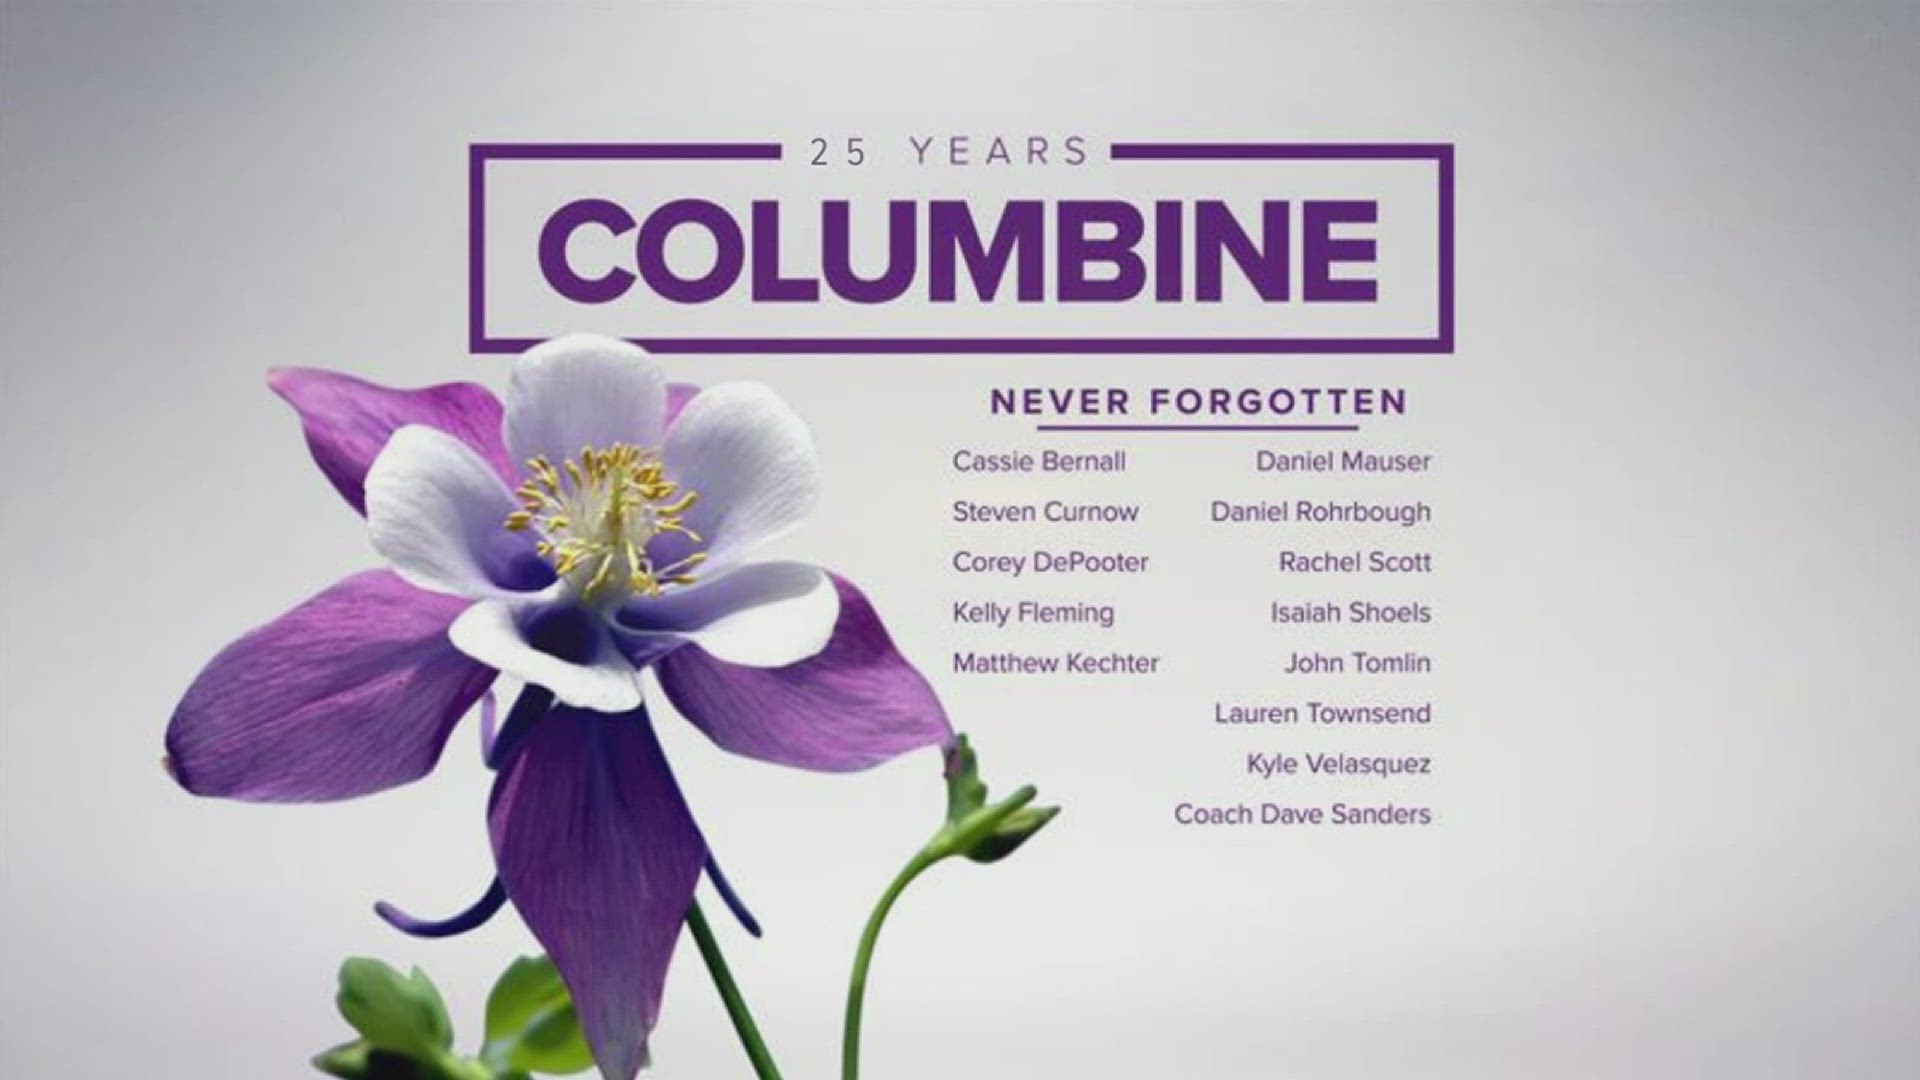 25 years after the Columbine High School massacre, in which 12 students and teachers were killed, a vigil was held.